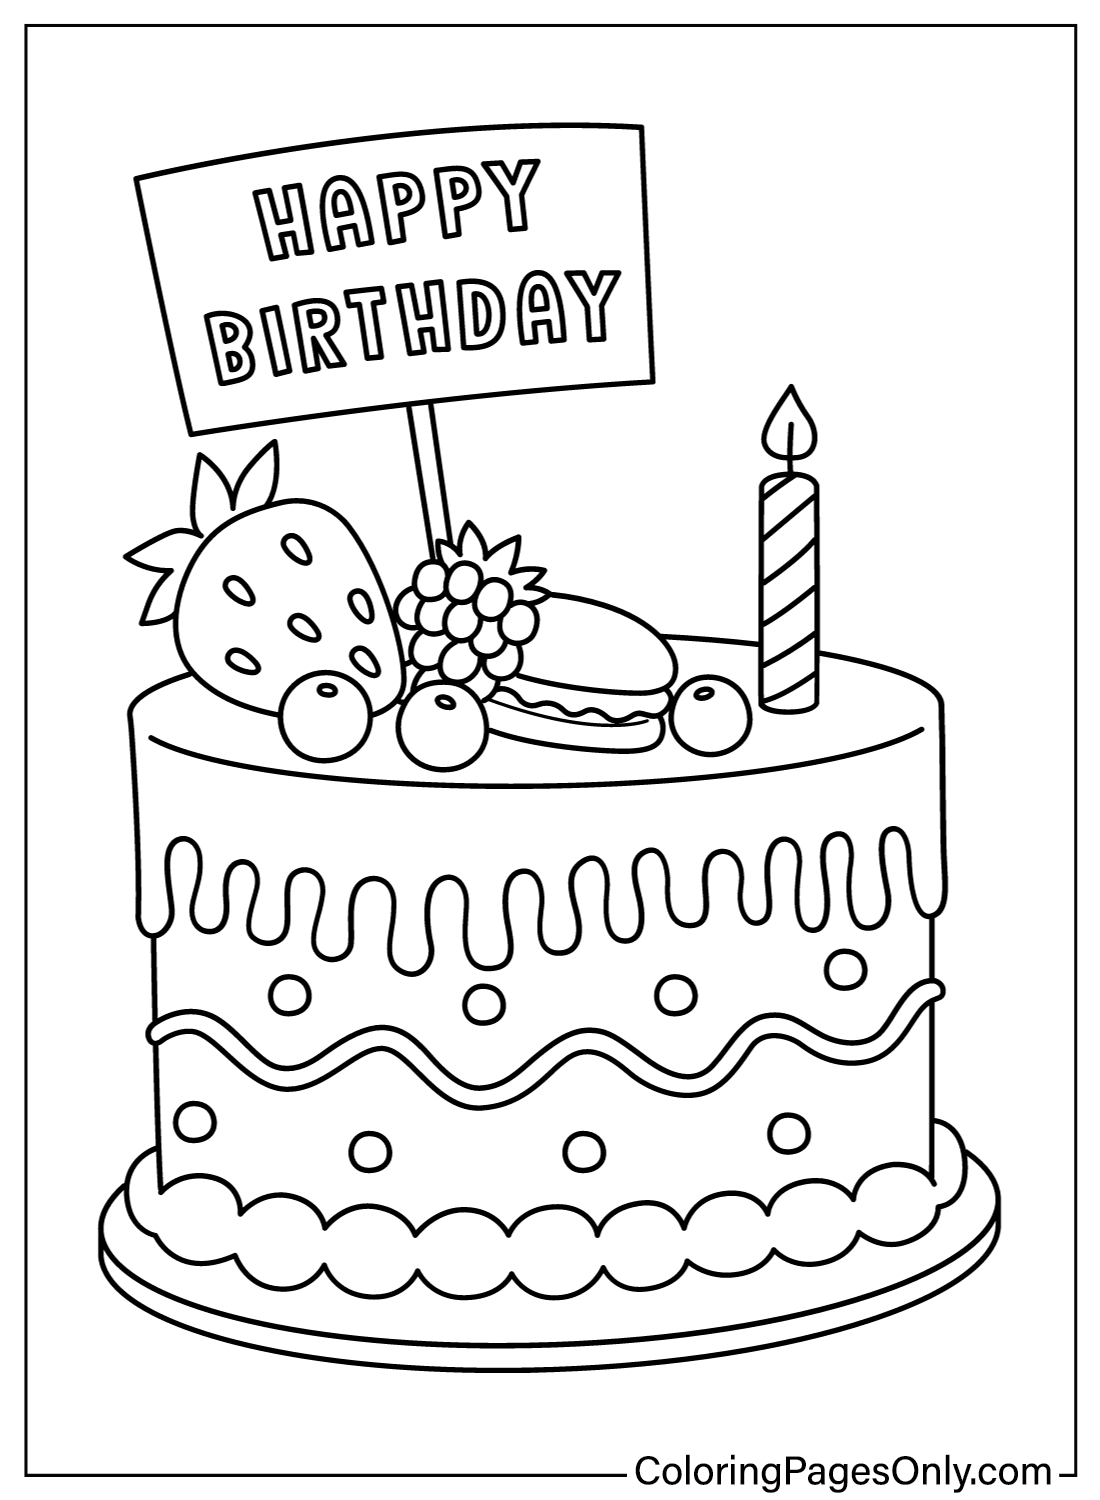 Birthday Cake Color Pages